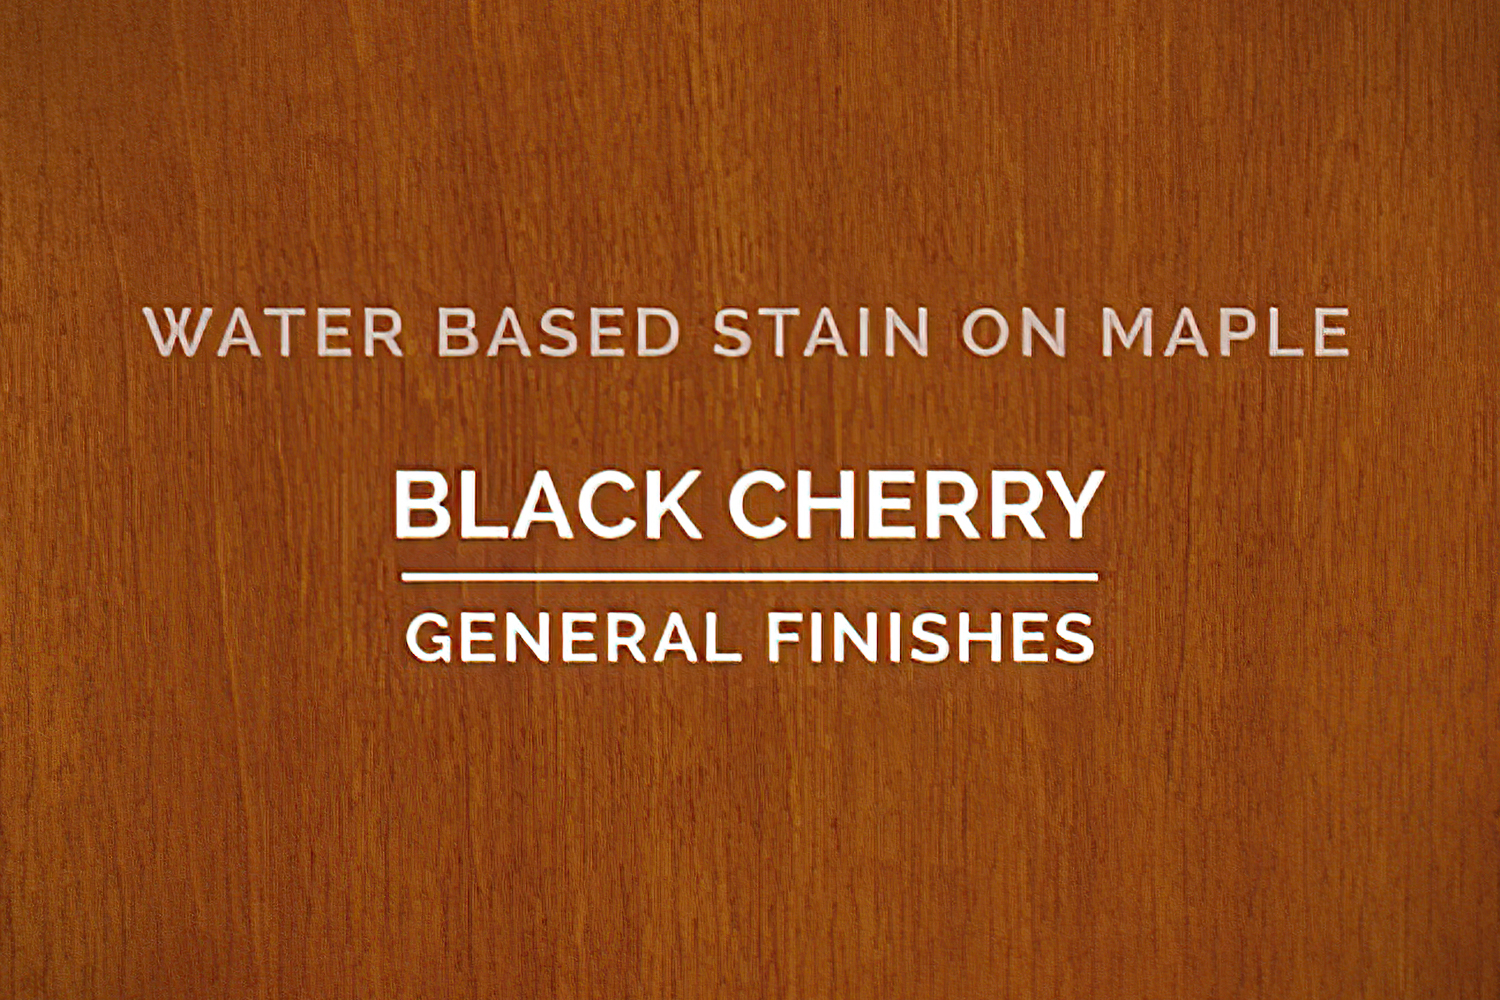 General Finishes Black Cherry Stain Water Based